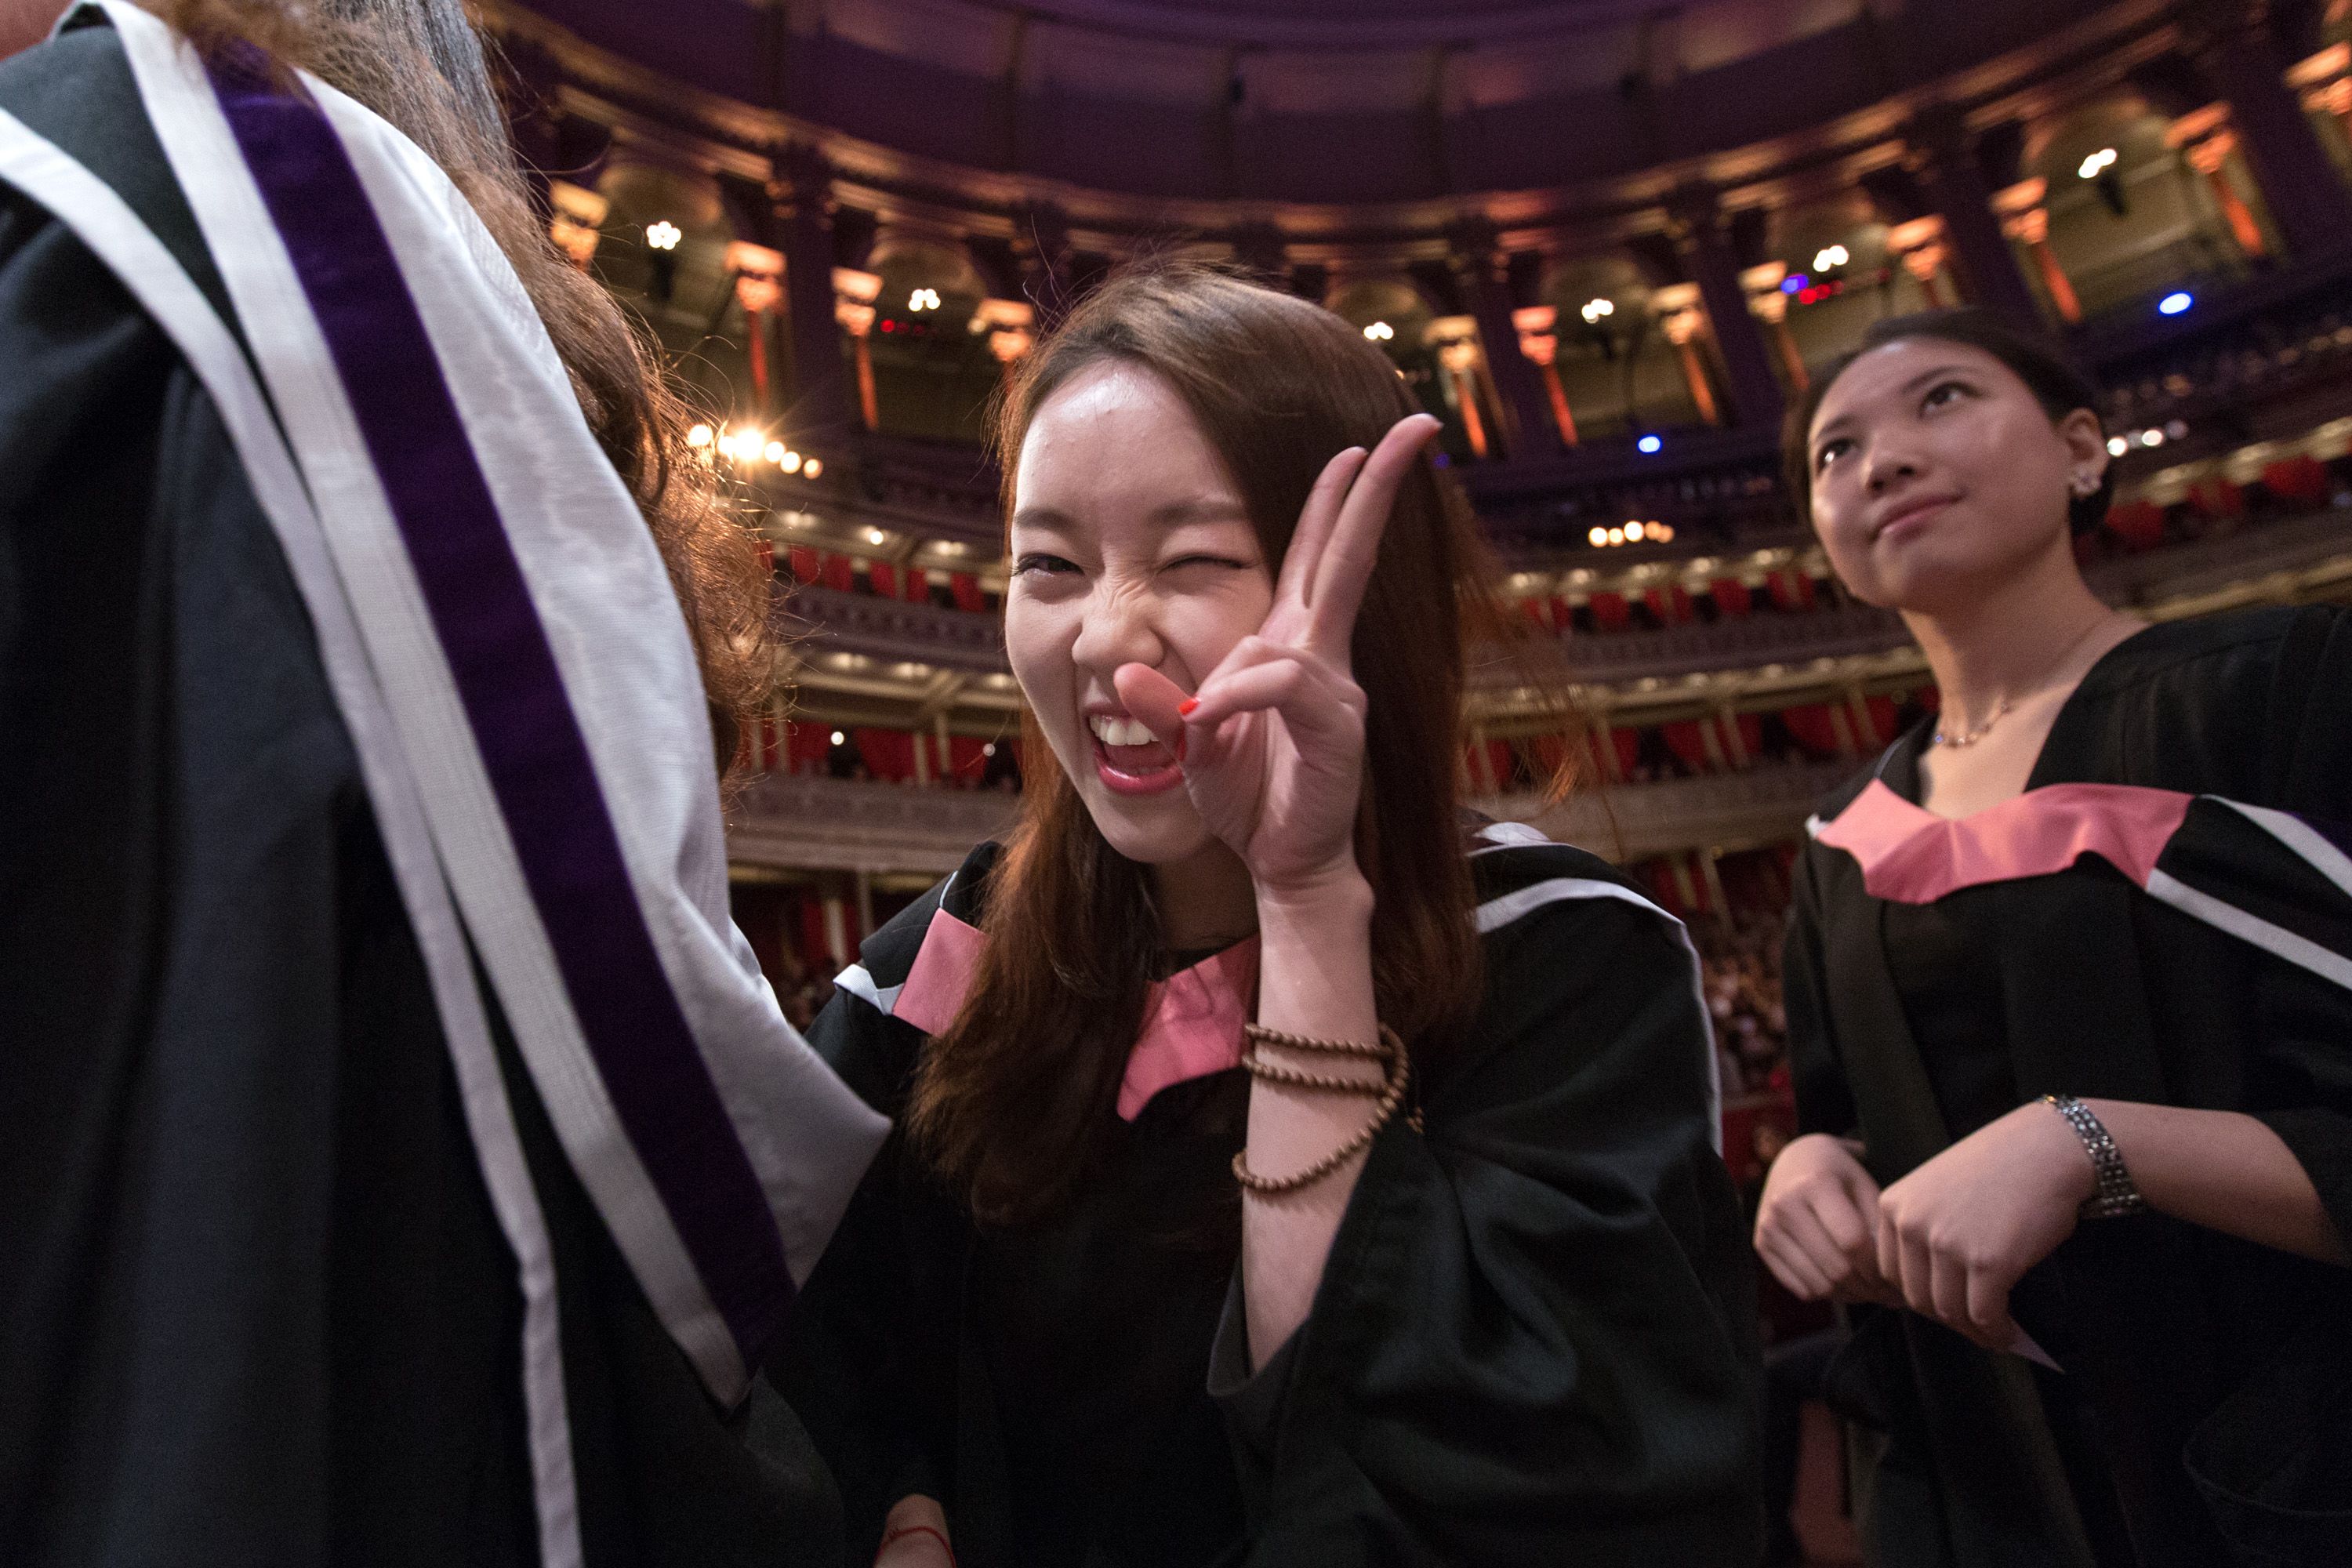 In the Albert Hall, a female student in robes holds her fingers in a peace sign while she queues to graduate